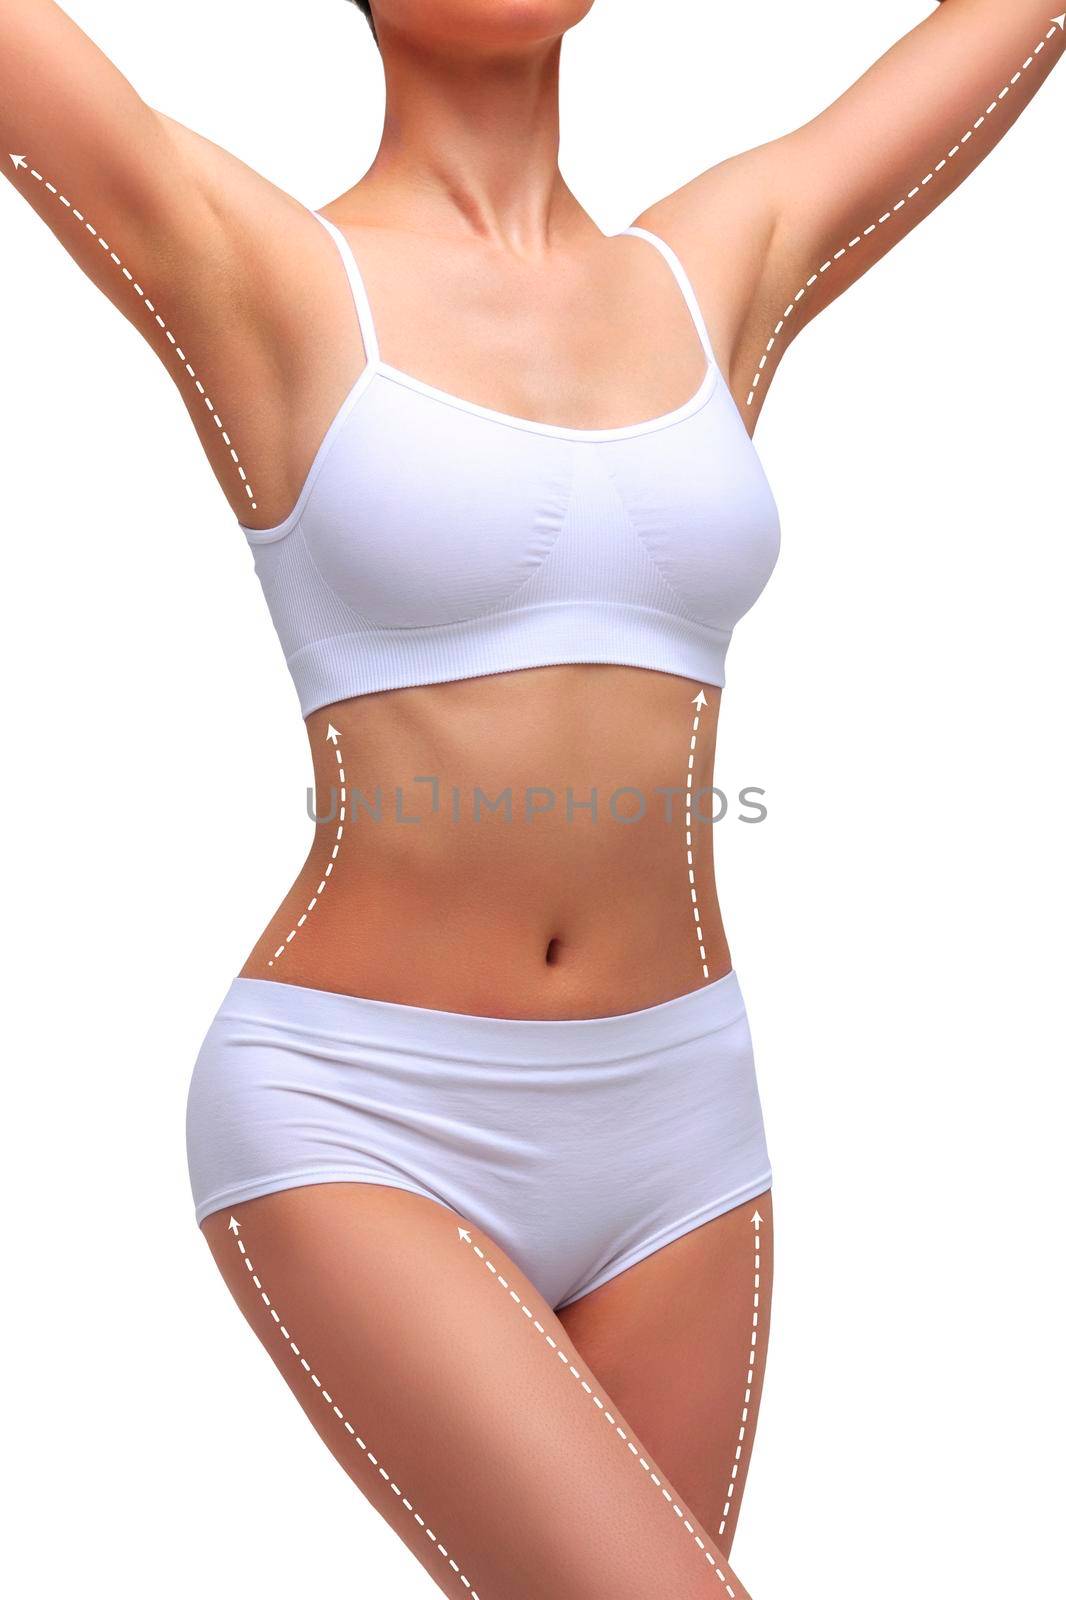 Dotted lines on beautiful female body. Closeup of woman slim fit body with white marks, isolated on white background